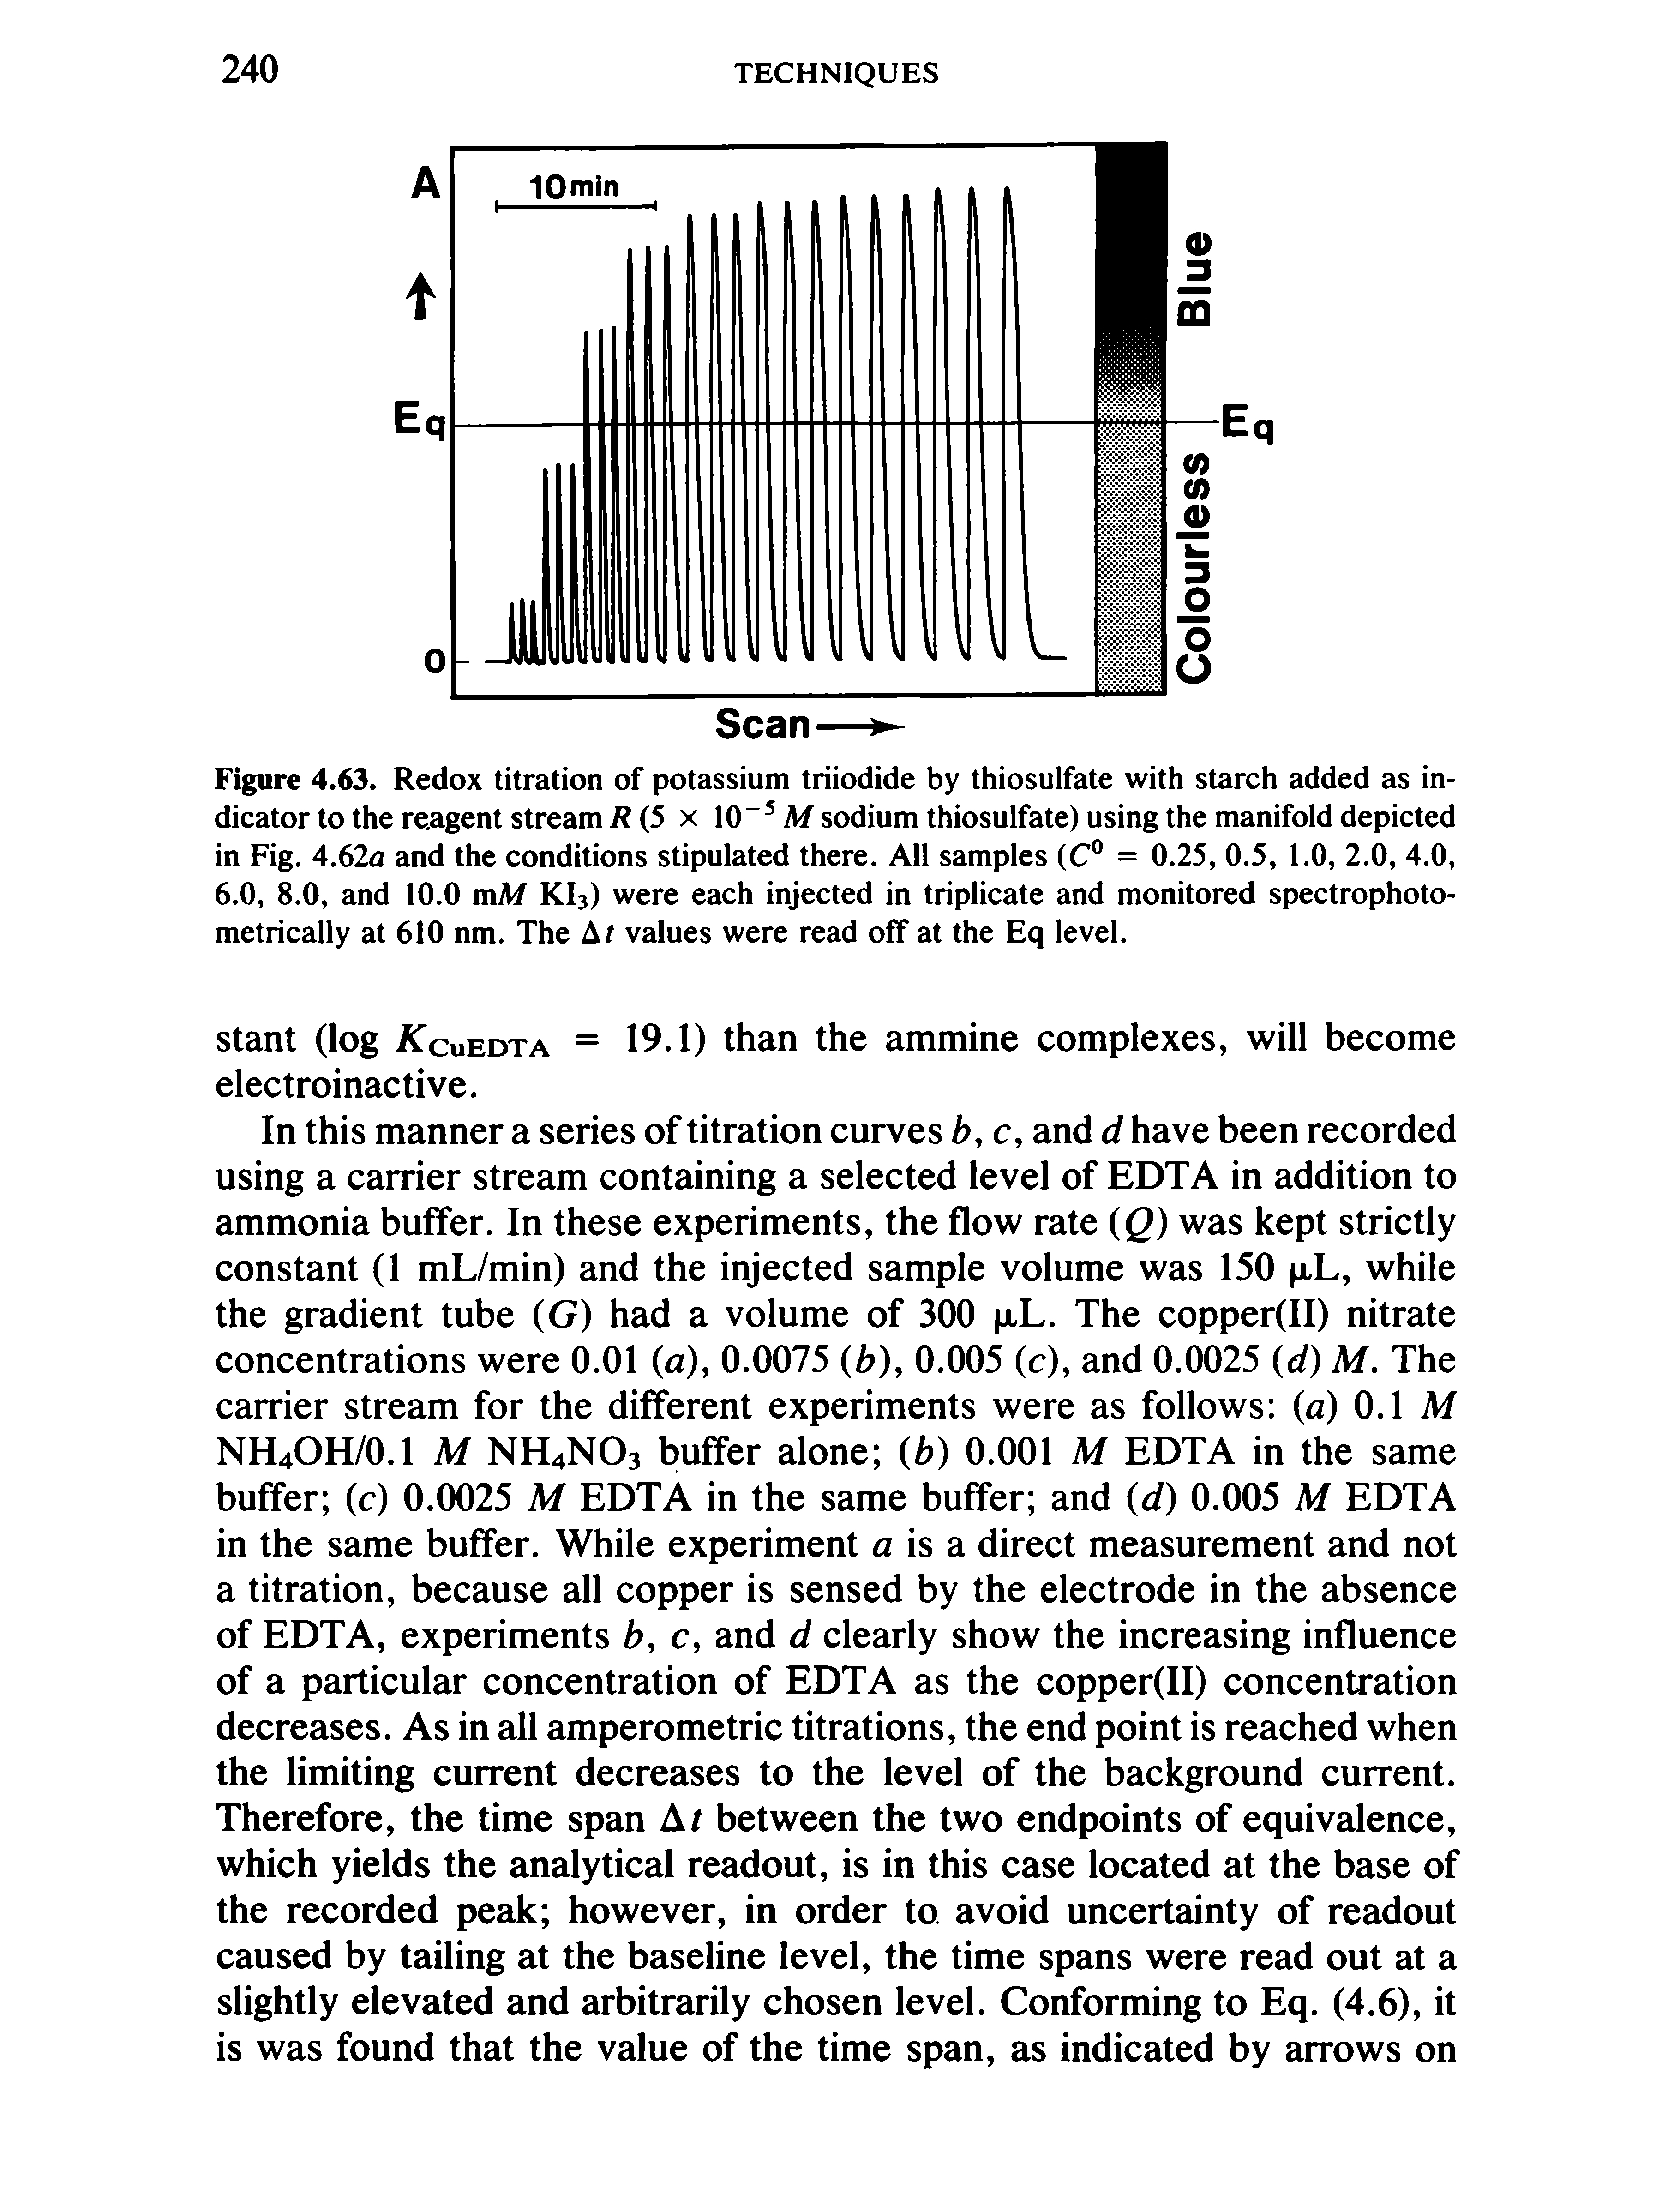 Figure 4.63. Redox titration of potassium triiodide by thiosulfate with starch added as indicator to the reagent stream R (5 x 10 M sodium thiosulfate) using the manifold depicted in Fig. 4.62a and the conditions stipulated there. All samples (C = 0.25, 0.5, 1.0, 2.0, 4.0, 6.0, 8.0, and 10.0 mM KI3) were each injected in triplicate and monitored spectrophoto-metrically at 610 nm. The At values were read off at the Eq level.